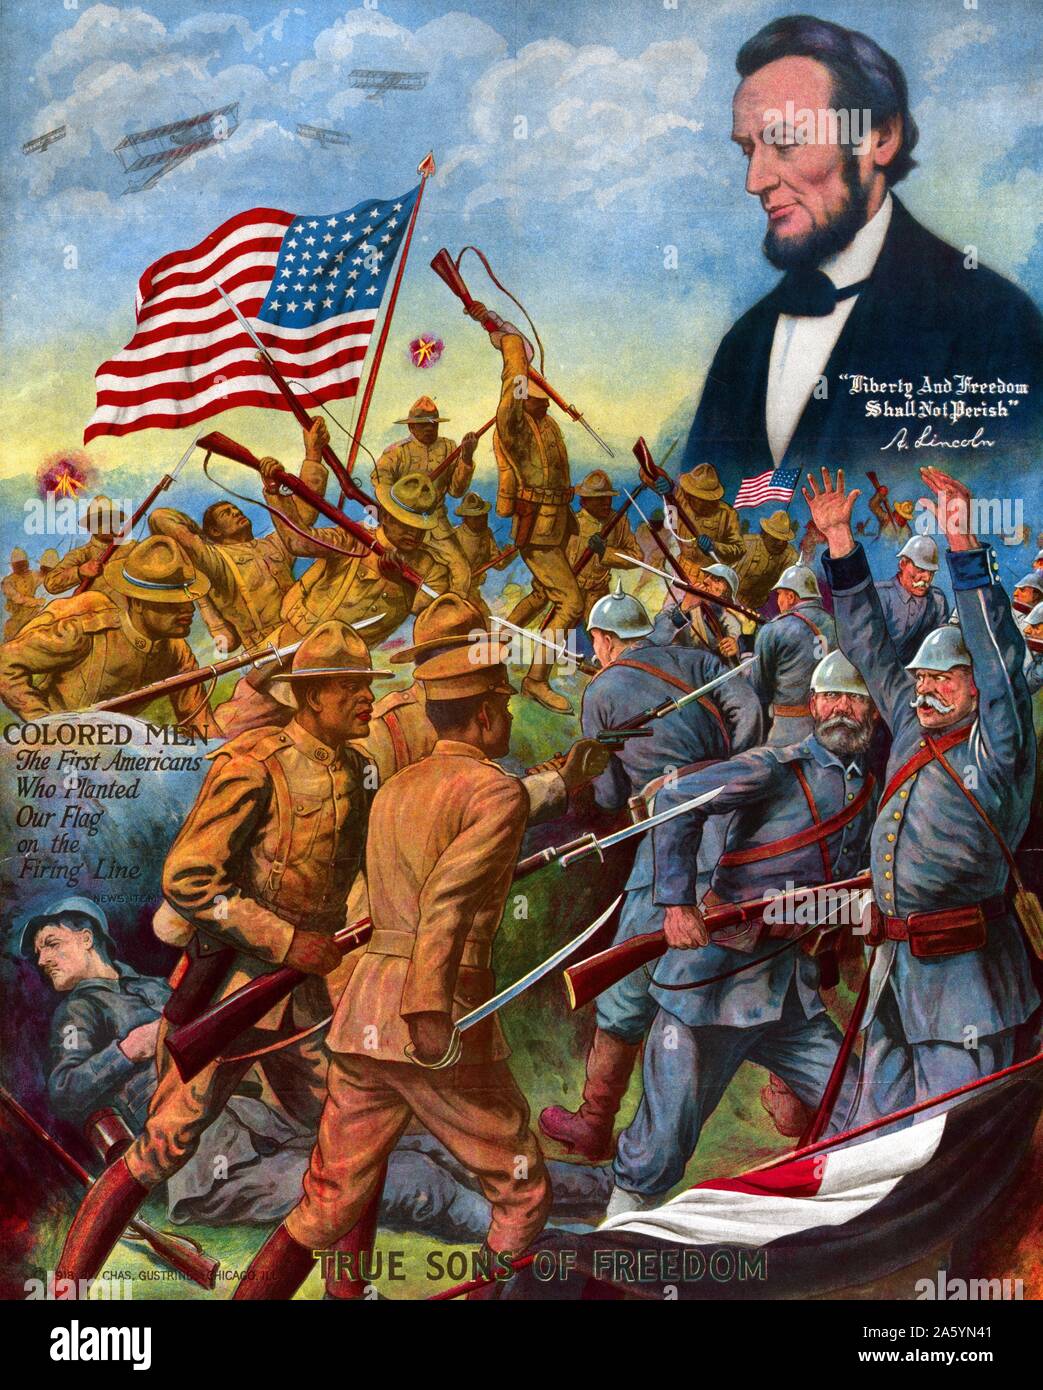 True Sons of Freedom 1918. African American soldiers fighting German soldiers in World War I. President Abraham Lincoln can be seen above soldiers. Gustrine Chas. Stock Photo